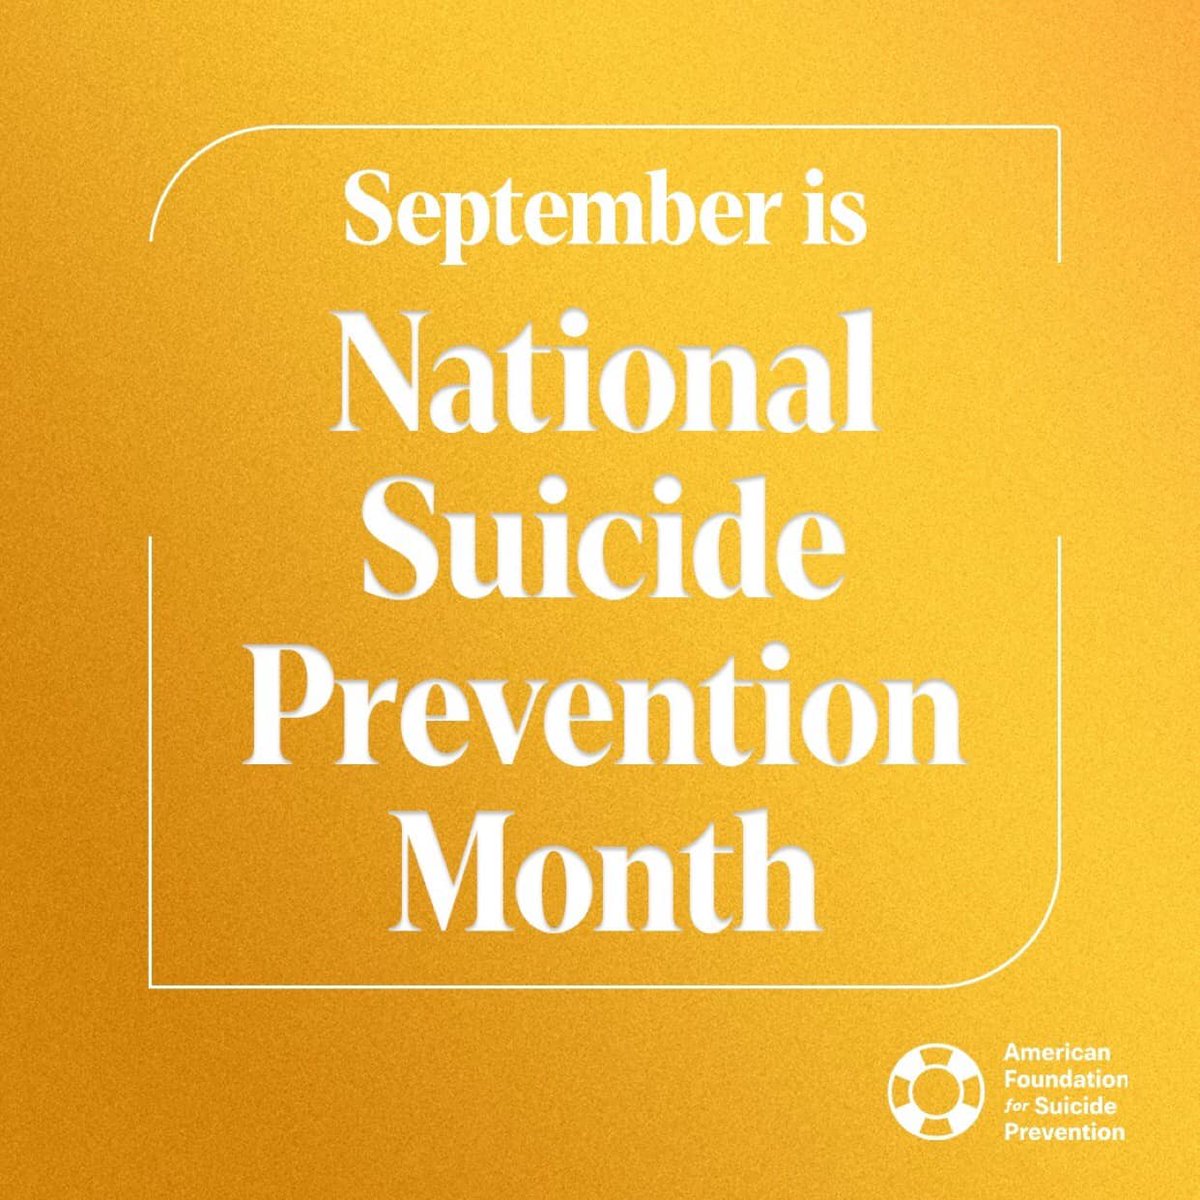 Call or text 988 to be connected to compassionate care and support for mental health related distress. You are not alone. 

#NationalSuicidePreventionMonth

Image from @afspnational